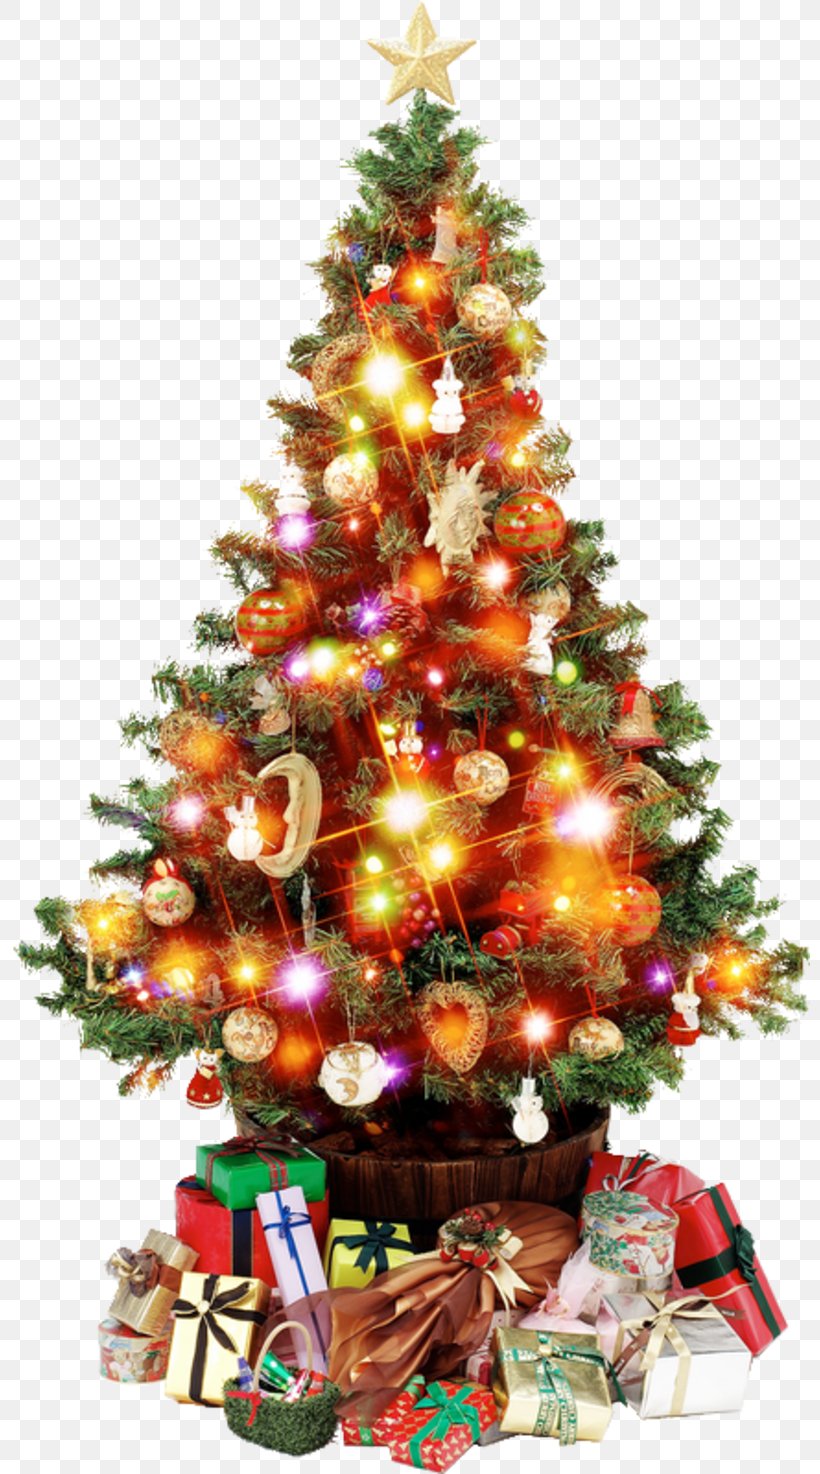 Artificial Christmas Tree Clip Art, PNG, 800x1474px, Christmas Tree, Artificial Christmas Tree, Christmas, Christmas Decoration, Christmas Lights Download Free